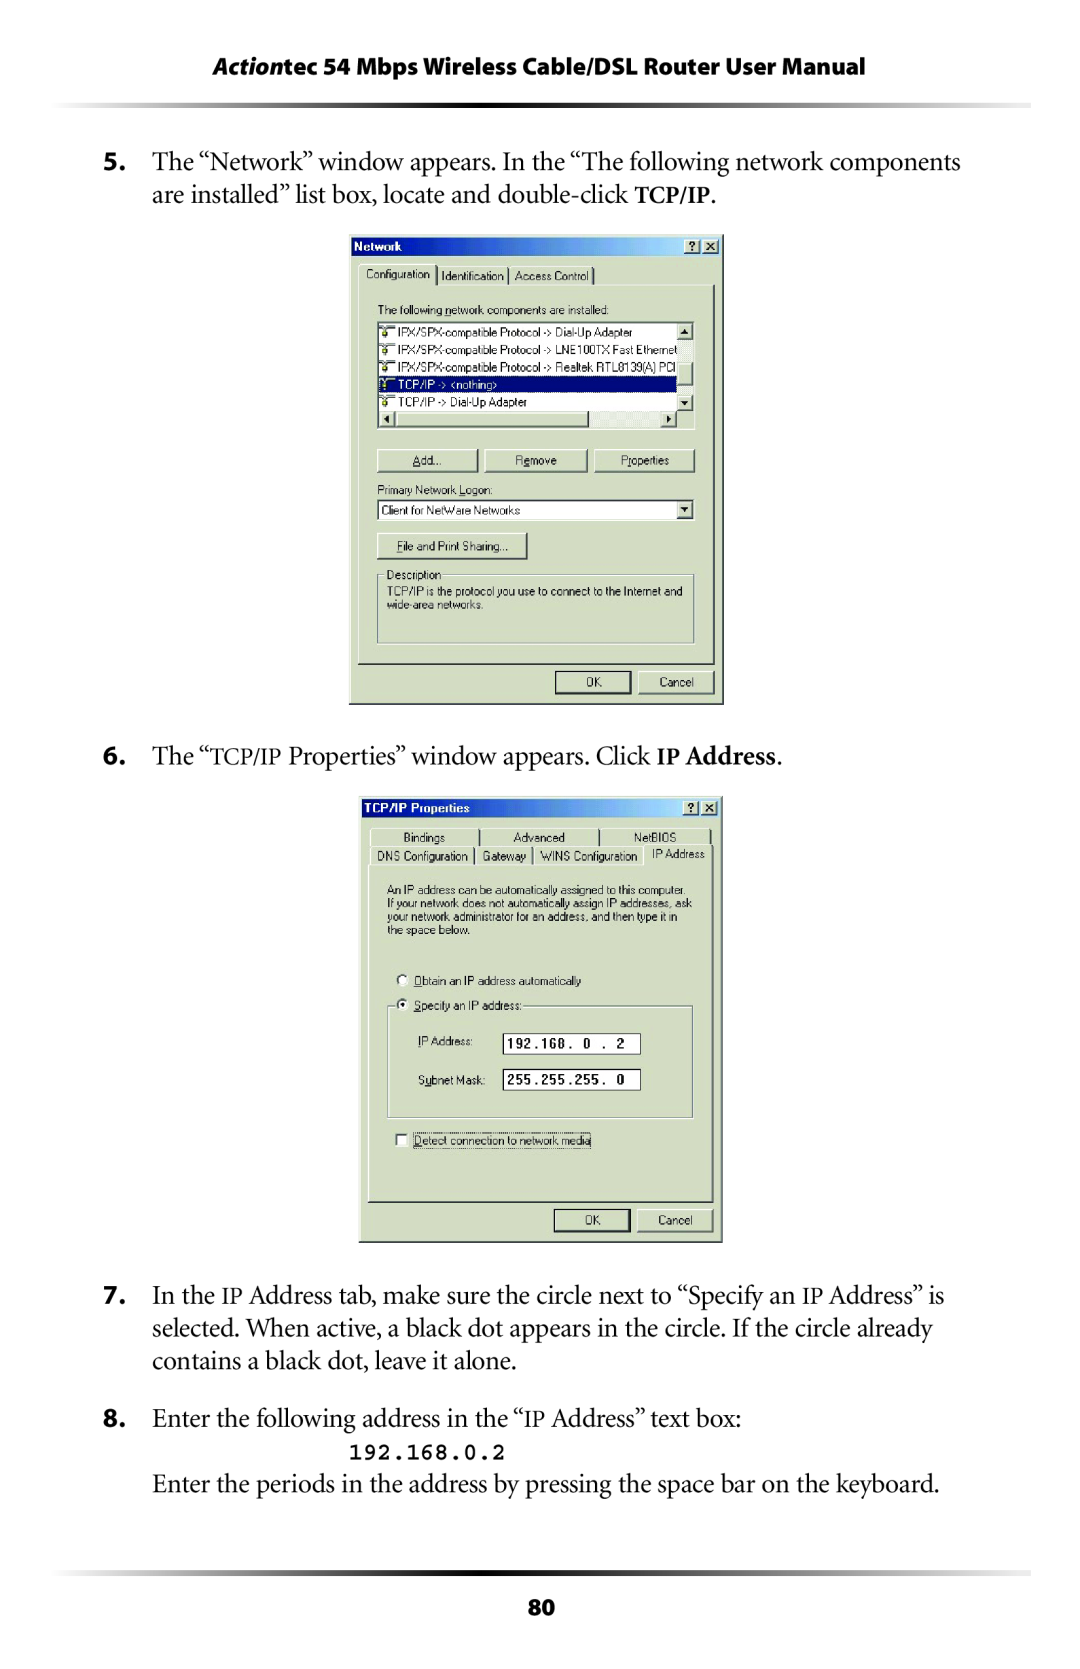 Actiontec electronic GT704WR user manual The “TCP/IP Properties” window appears. Click IP Address 